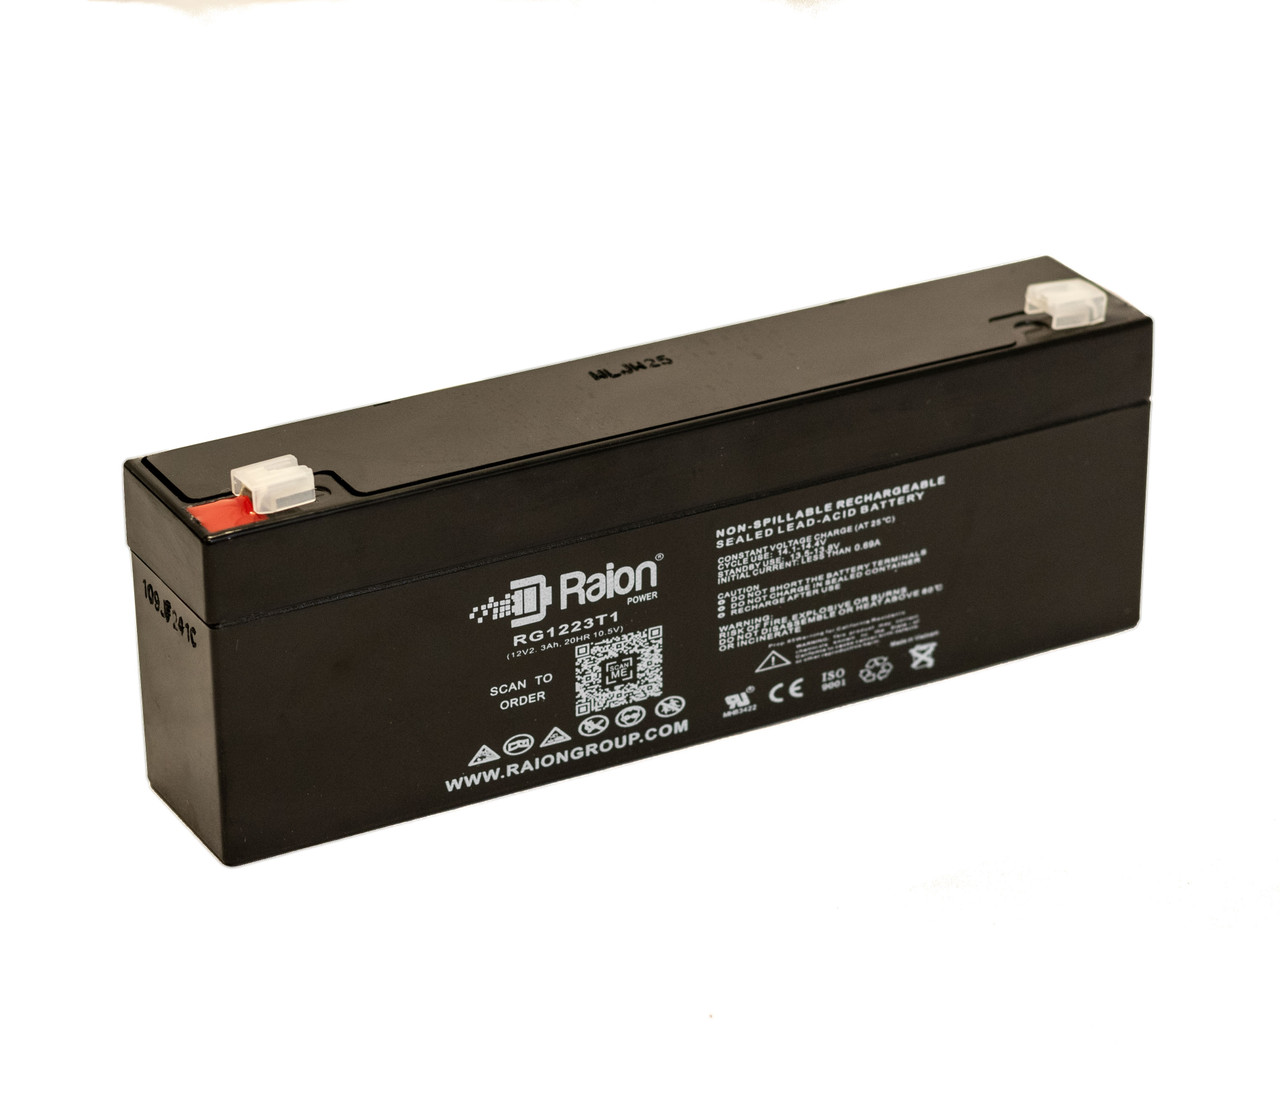 Raion Power RG1223T1 Replacement Battery for Odonnell PA1229